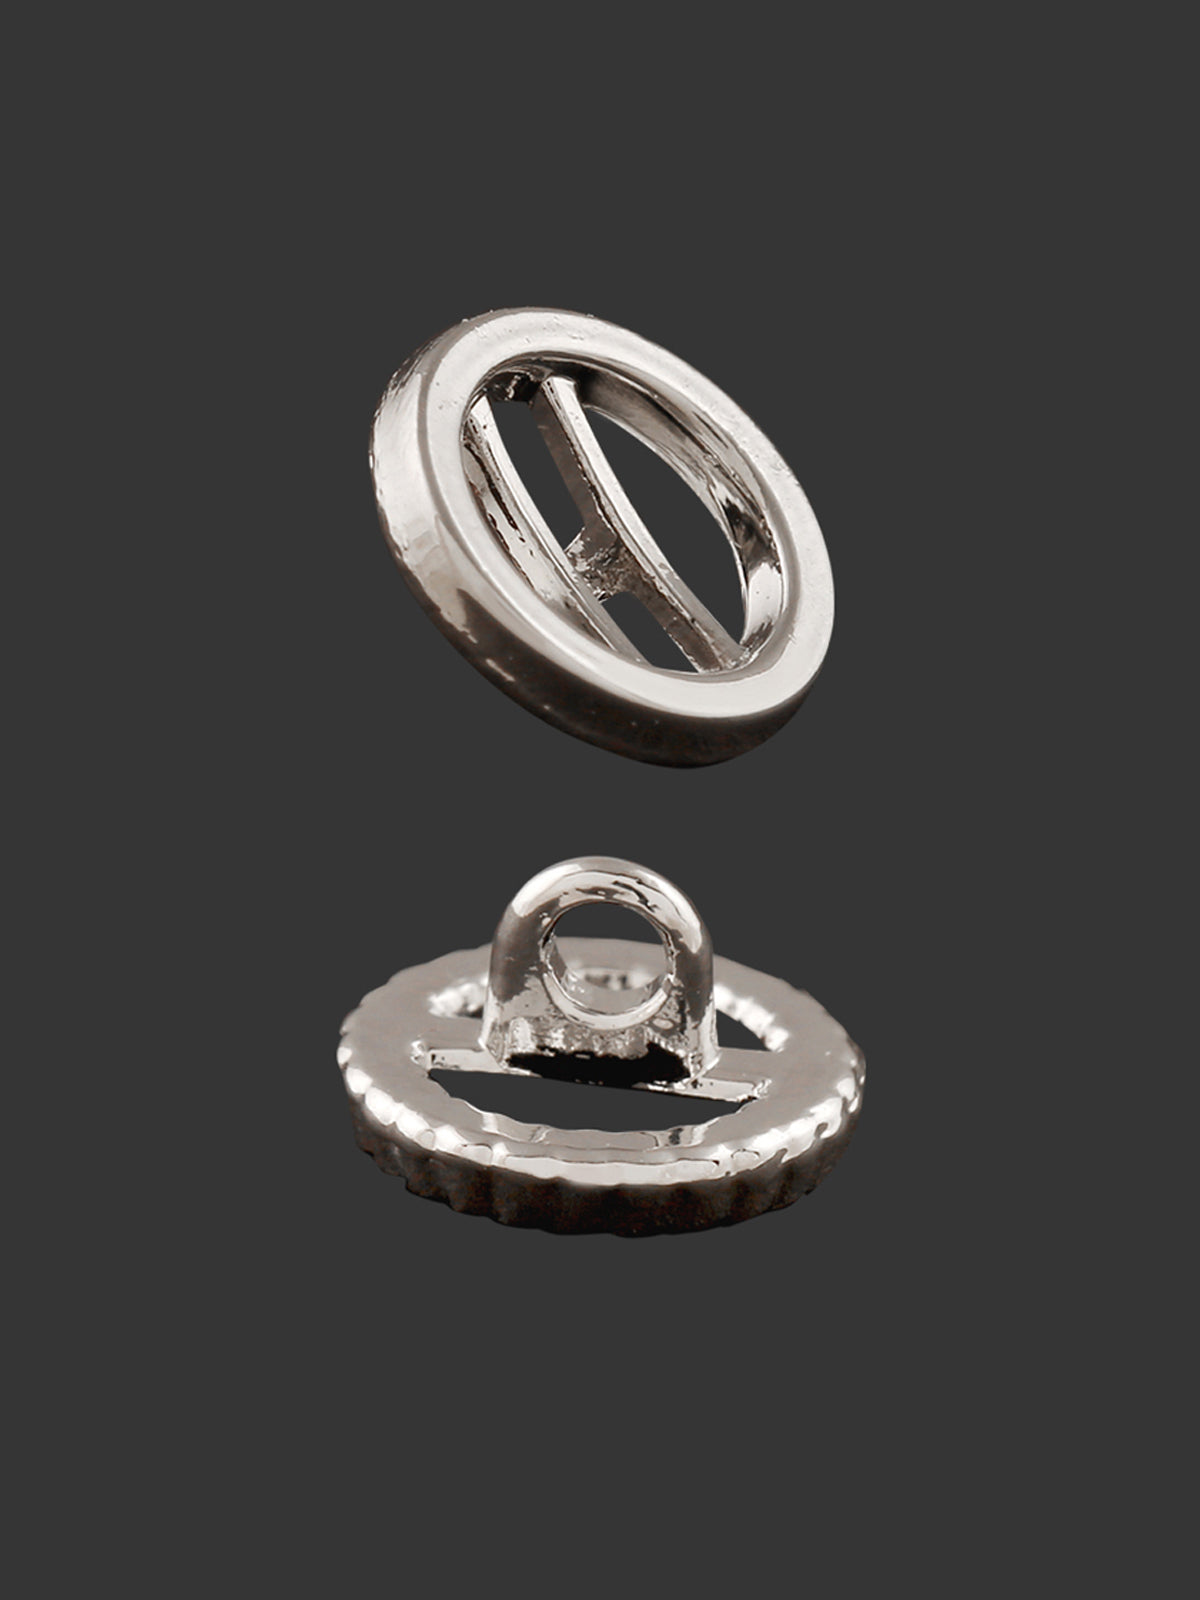 Shiny Silver Round Ring Shape Shank Metal Button